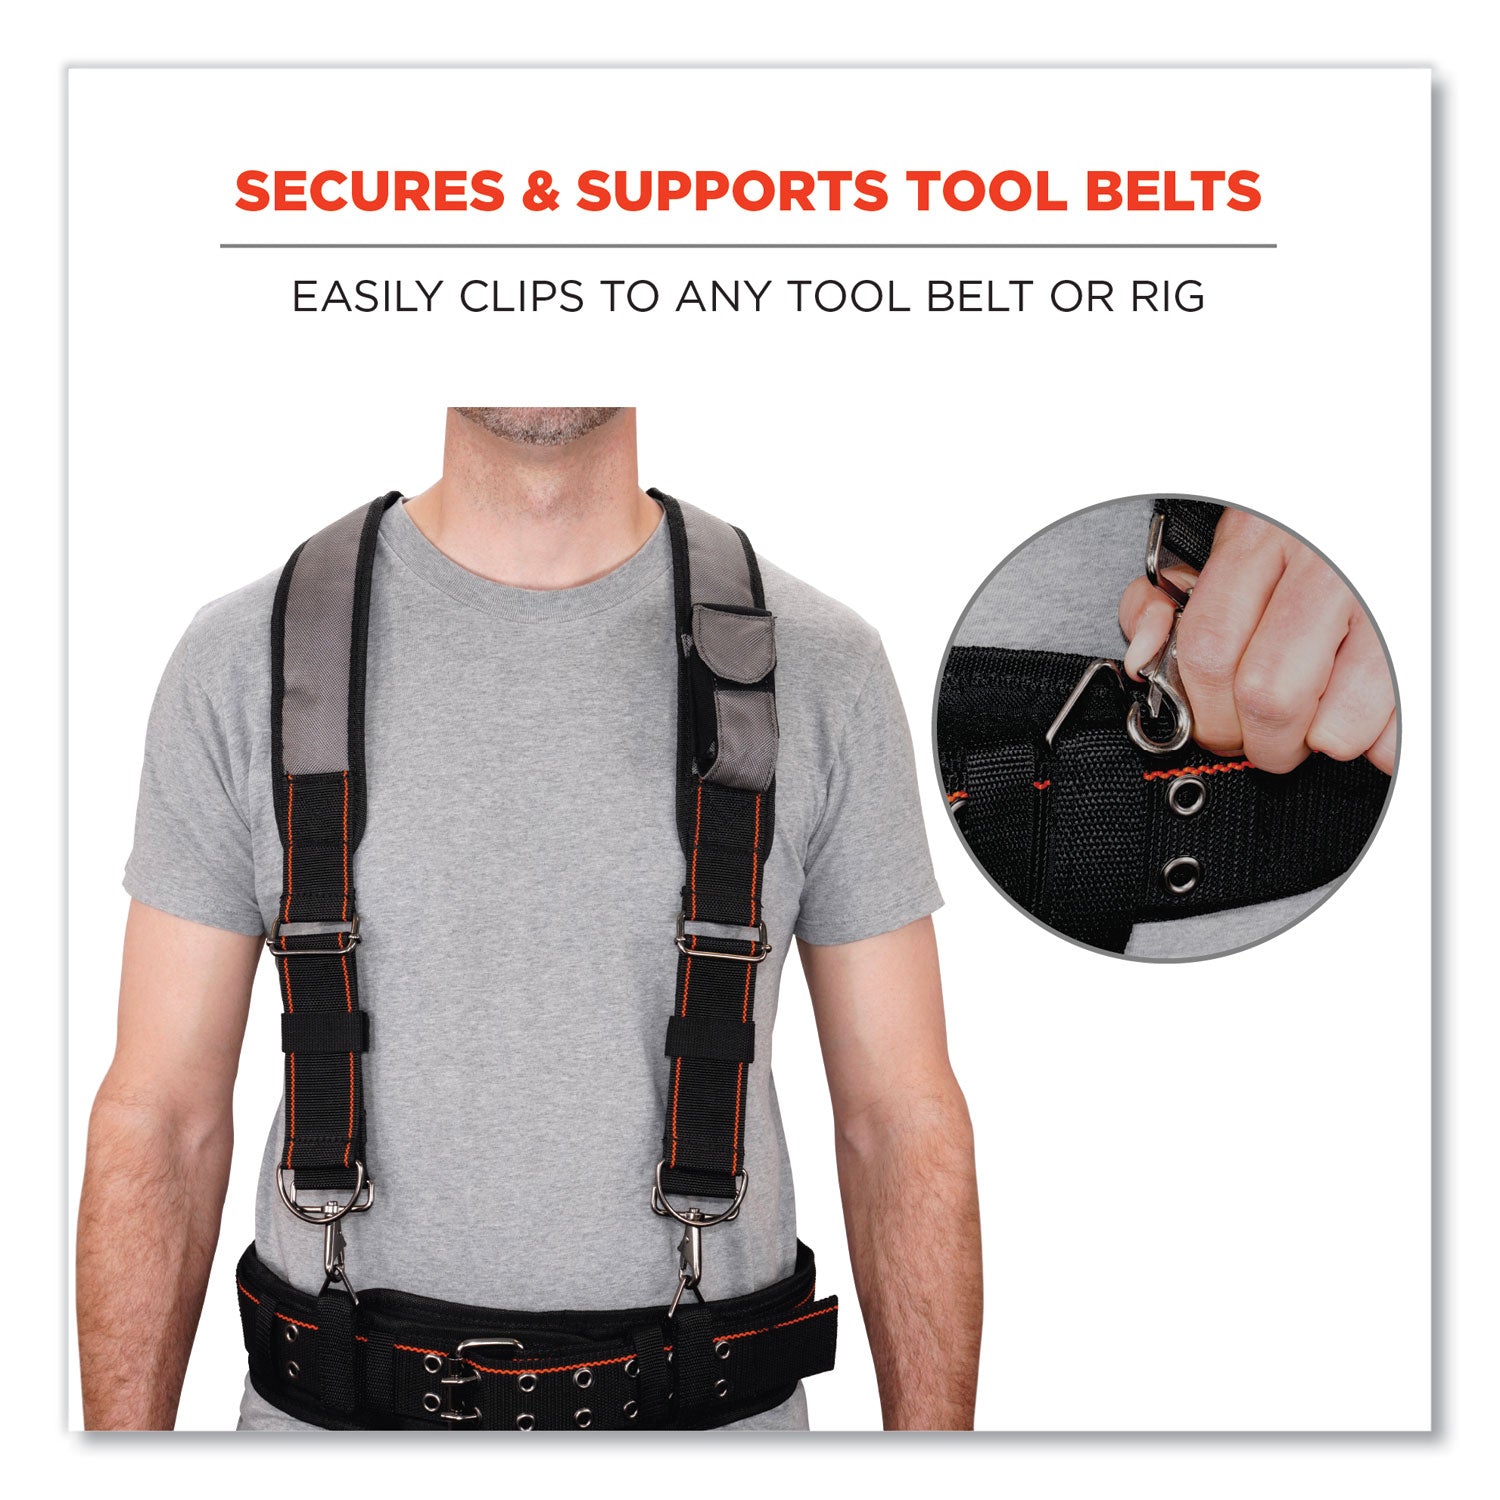 arsenal-5560-padded-tool-belt-suspenders-36-to-48-waist-3-wide-polyester-gray-ships-in-1-3-business-days_ego13665 - 2